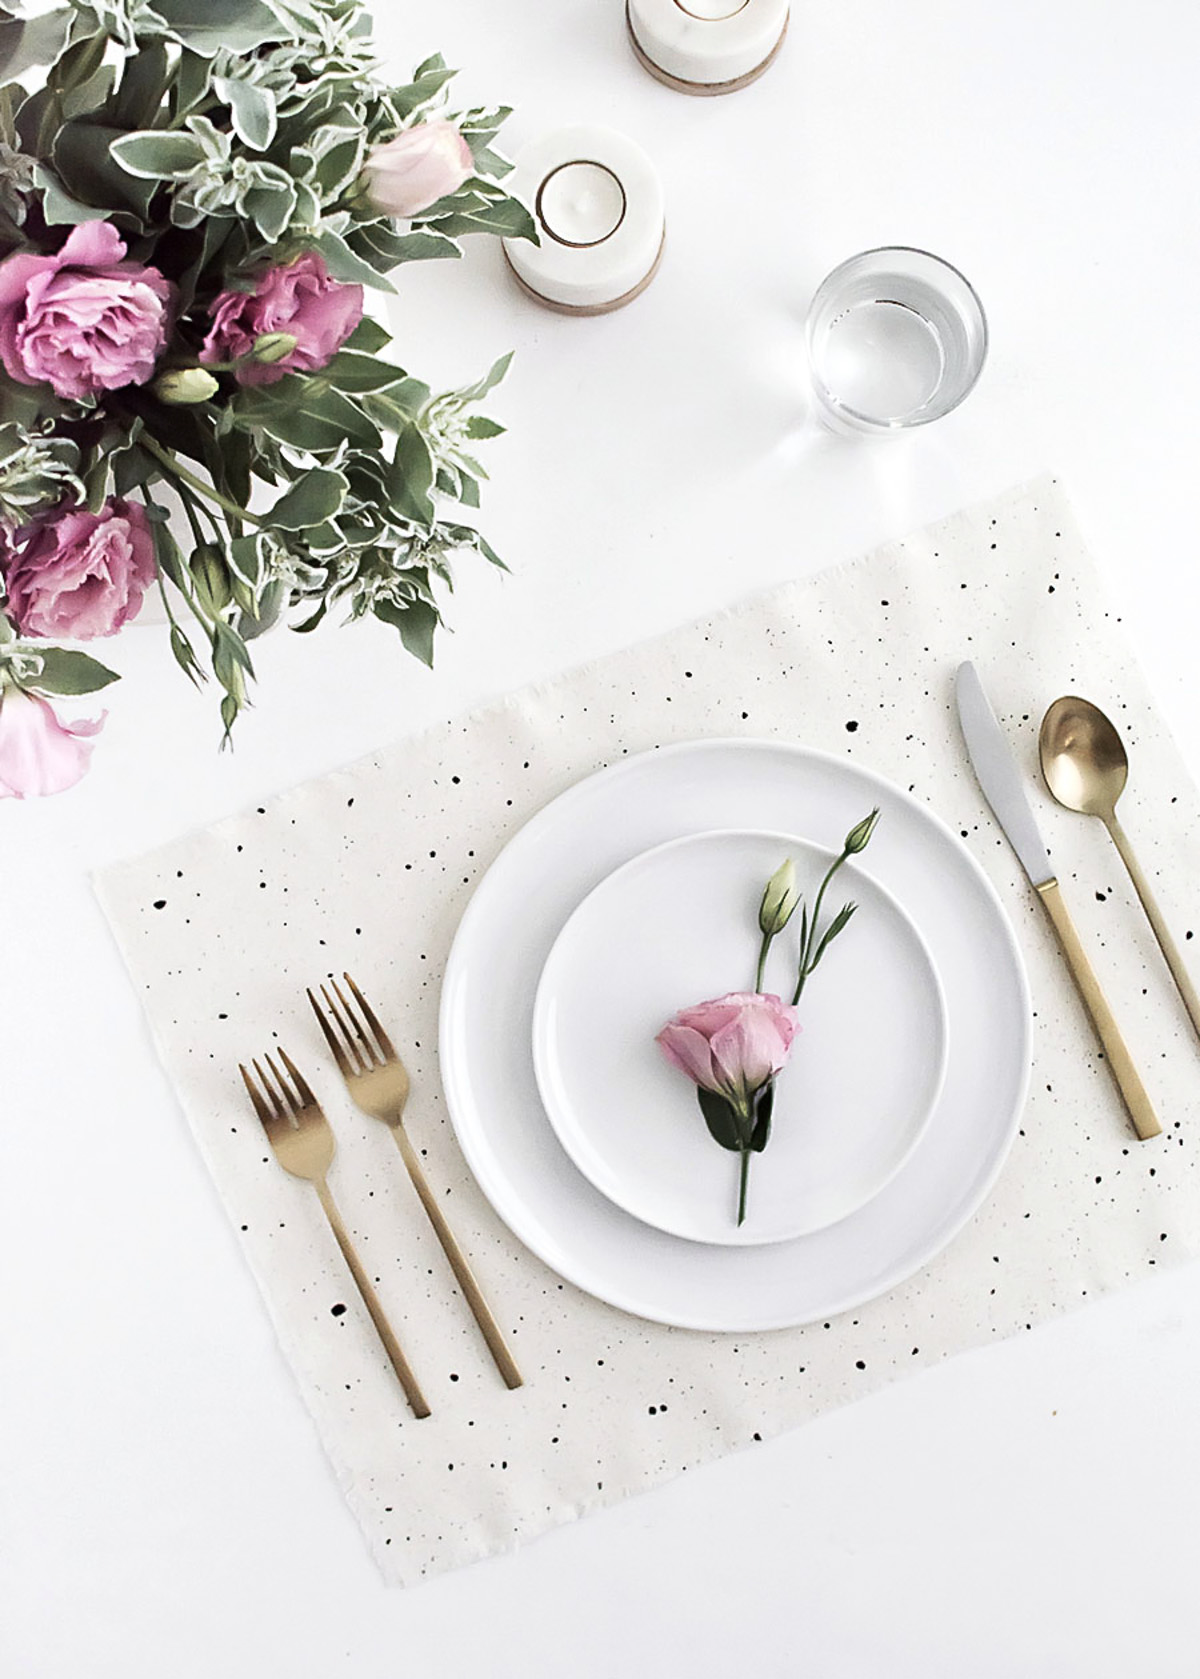 DIY Easter placemats with speckled egg prints (via www.homeyohmy.com)